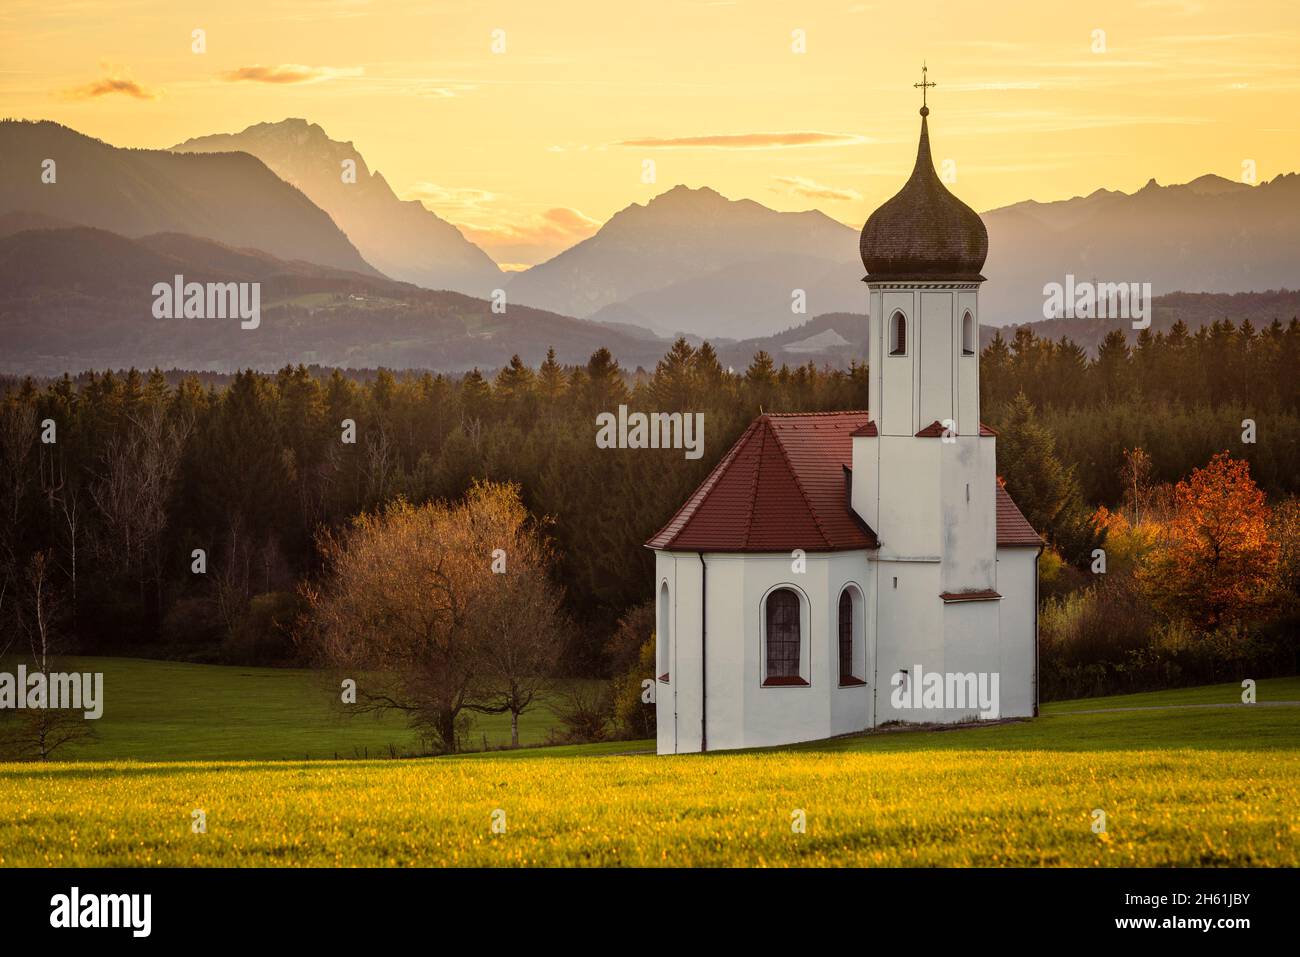 The Baroque Chapel of St. Johann above the Loisach Valley and the autumnal Bavarian Alps with Mount Zugspitze in the evening sun, Germany Stock Photo